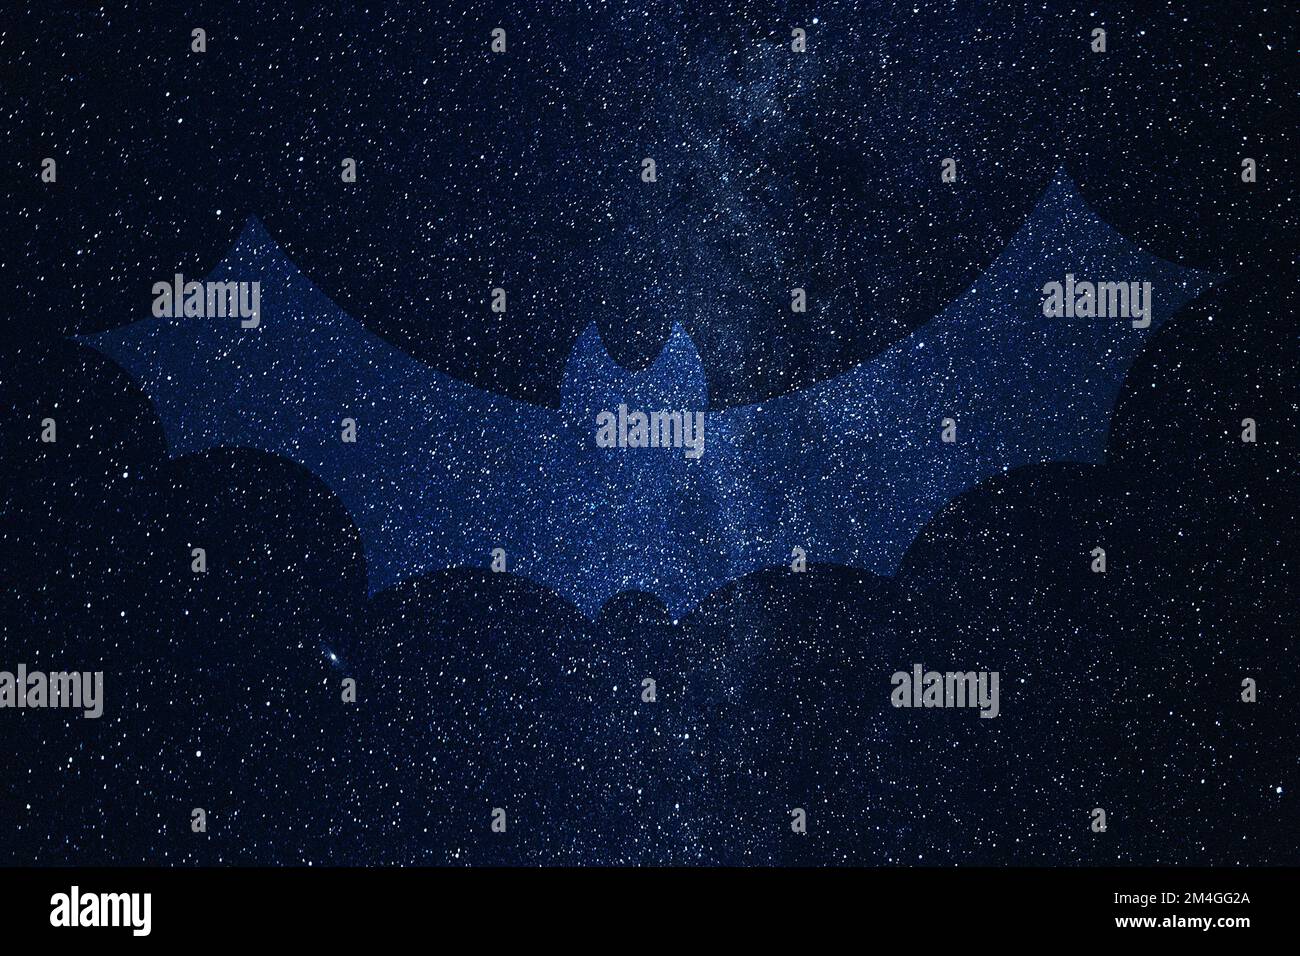 Silhouette of bat flying against background of starry night sky. Stock Photo